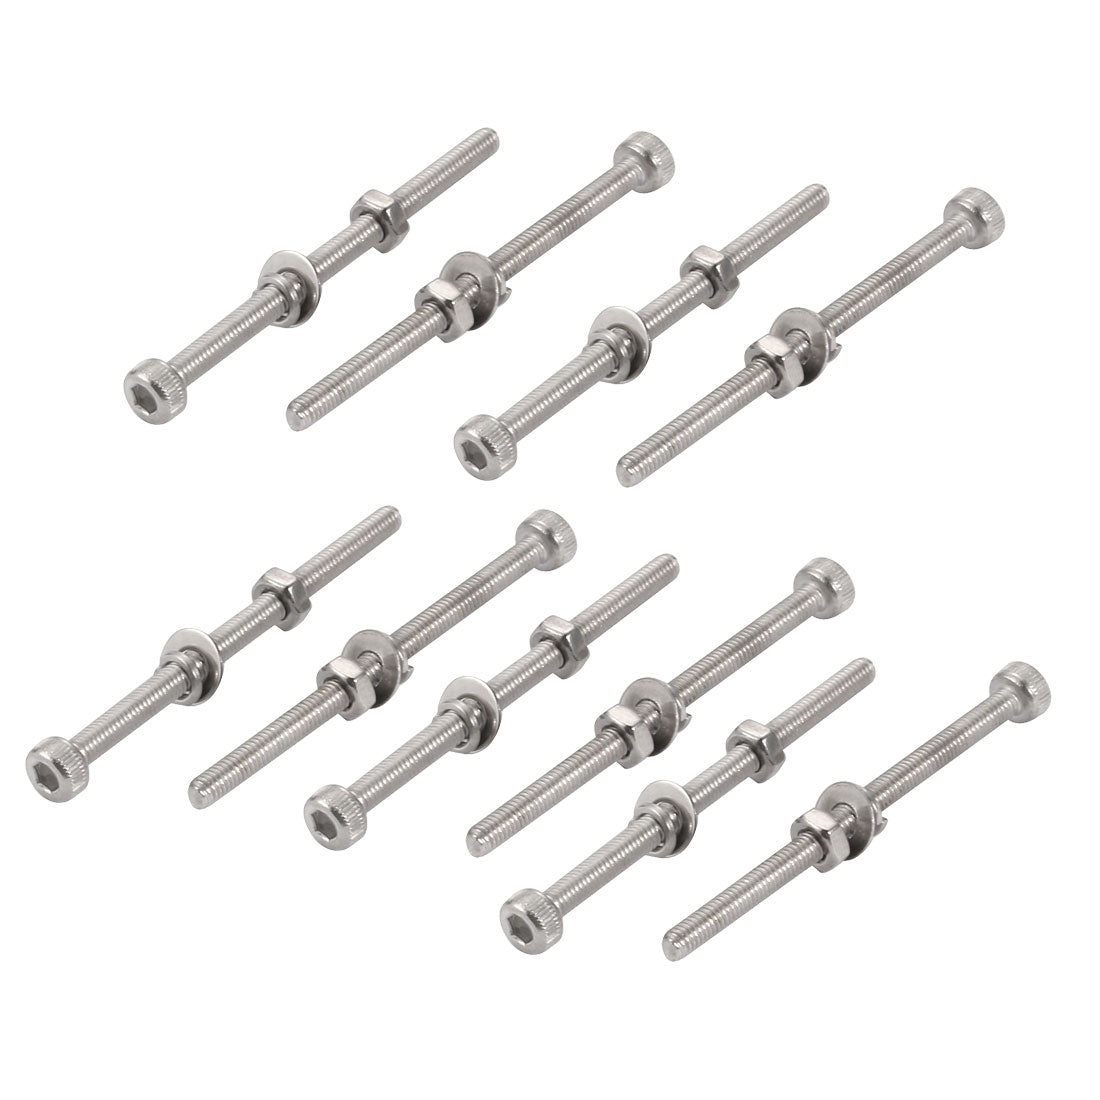 uxcell Uxcell 10Pcs M3x50mm 304 Stainless Steel Knurled Hex Socket Head Bolt Nut Set w Washer